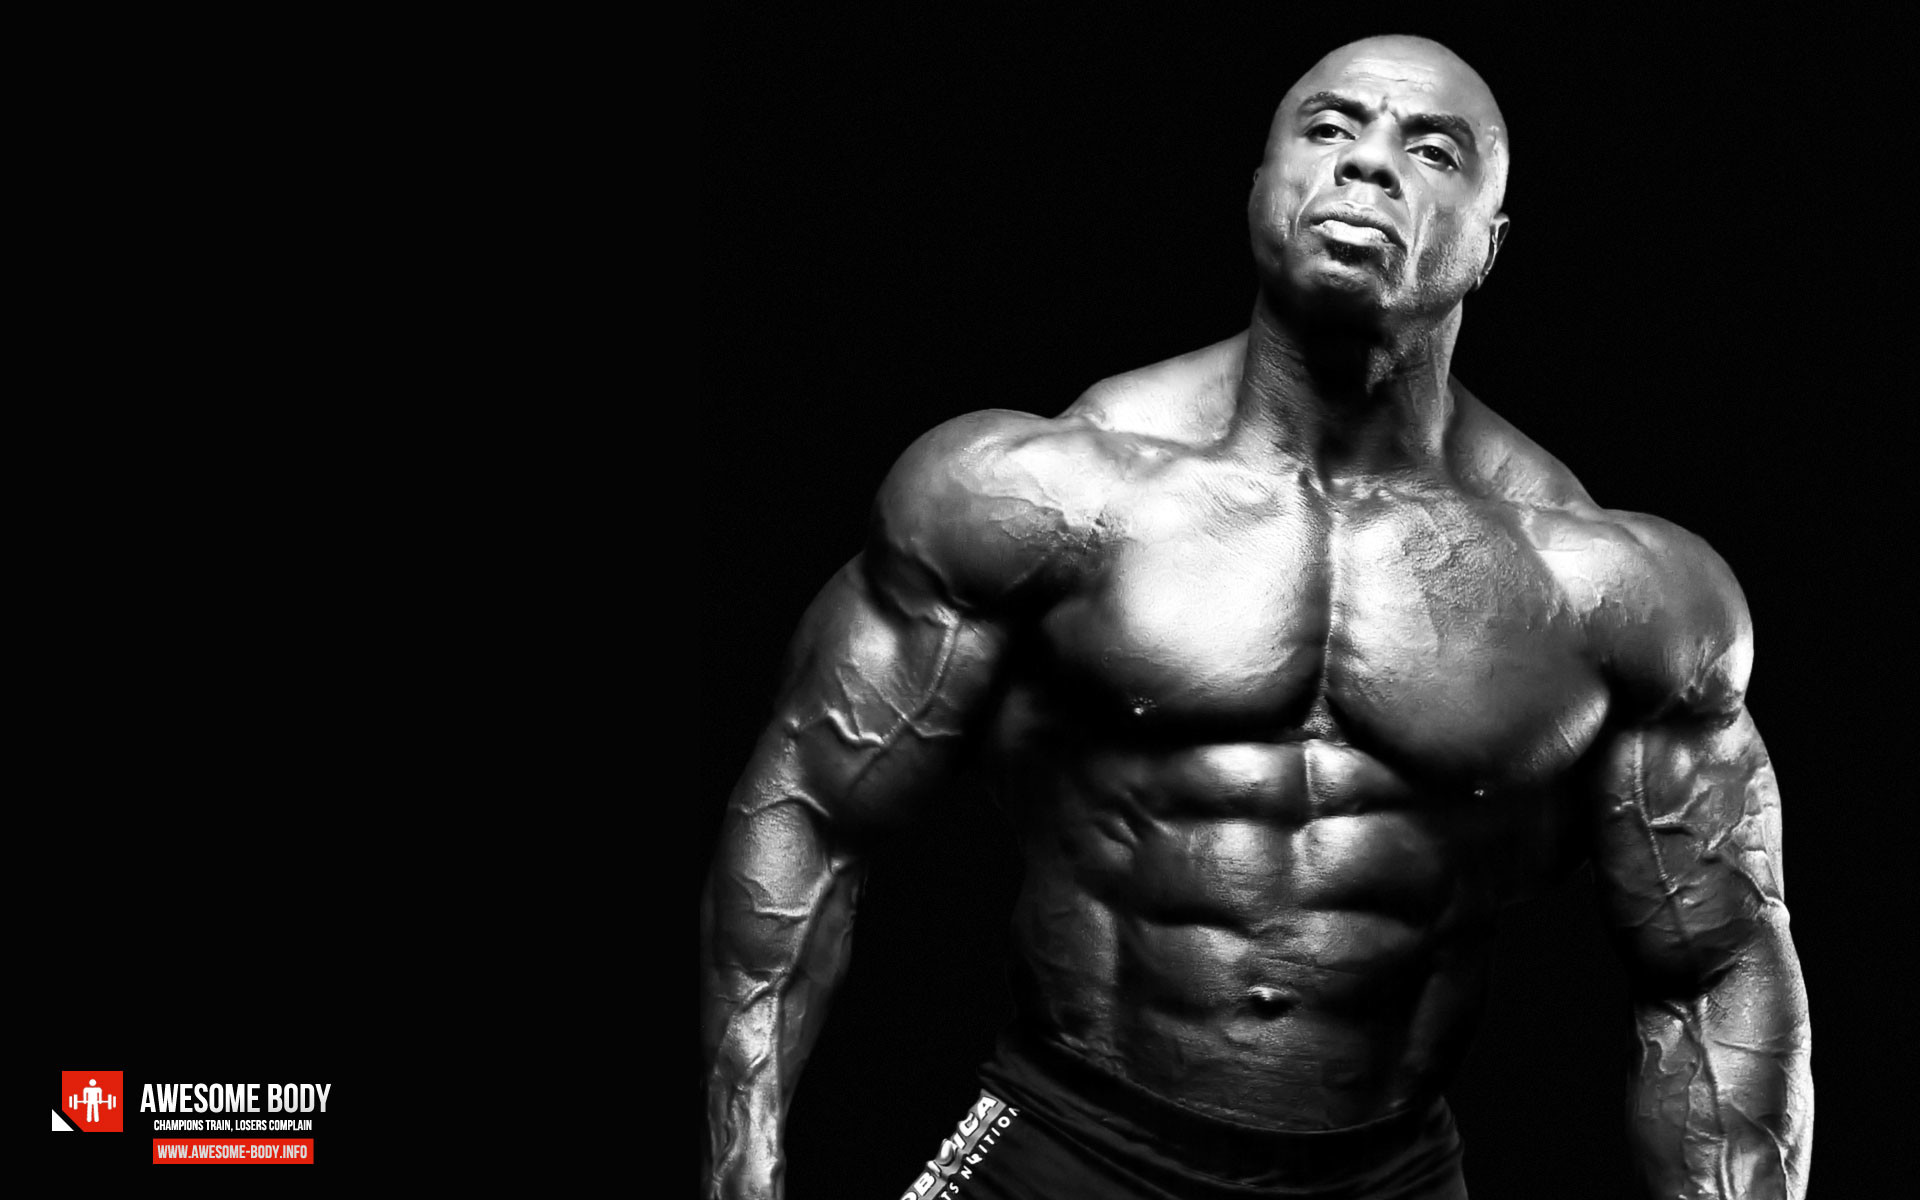 Hd Wallpapers Blog: Bodybuilding Pictures